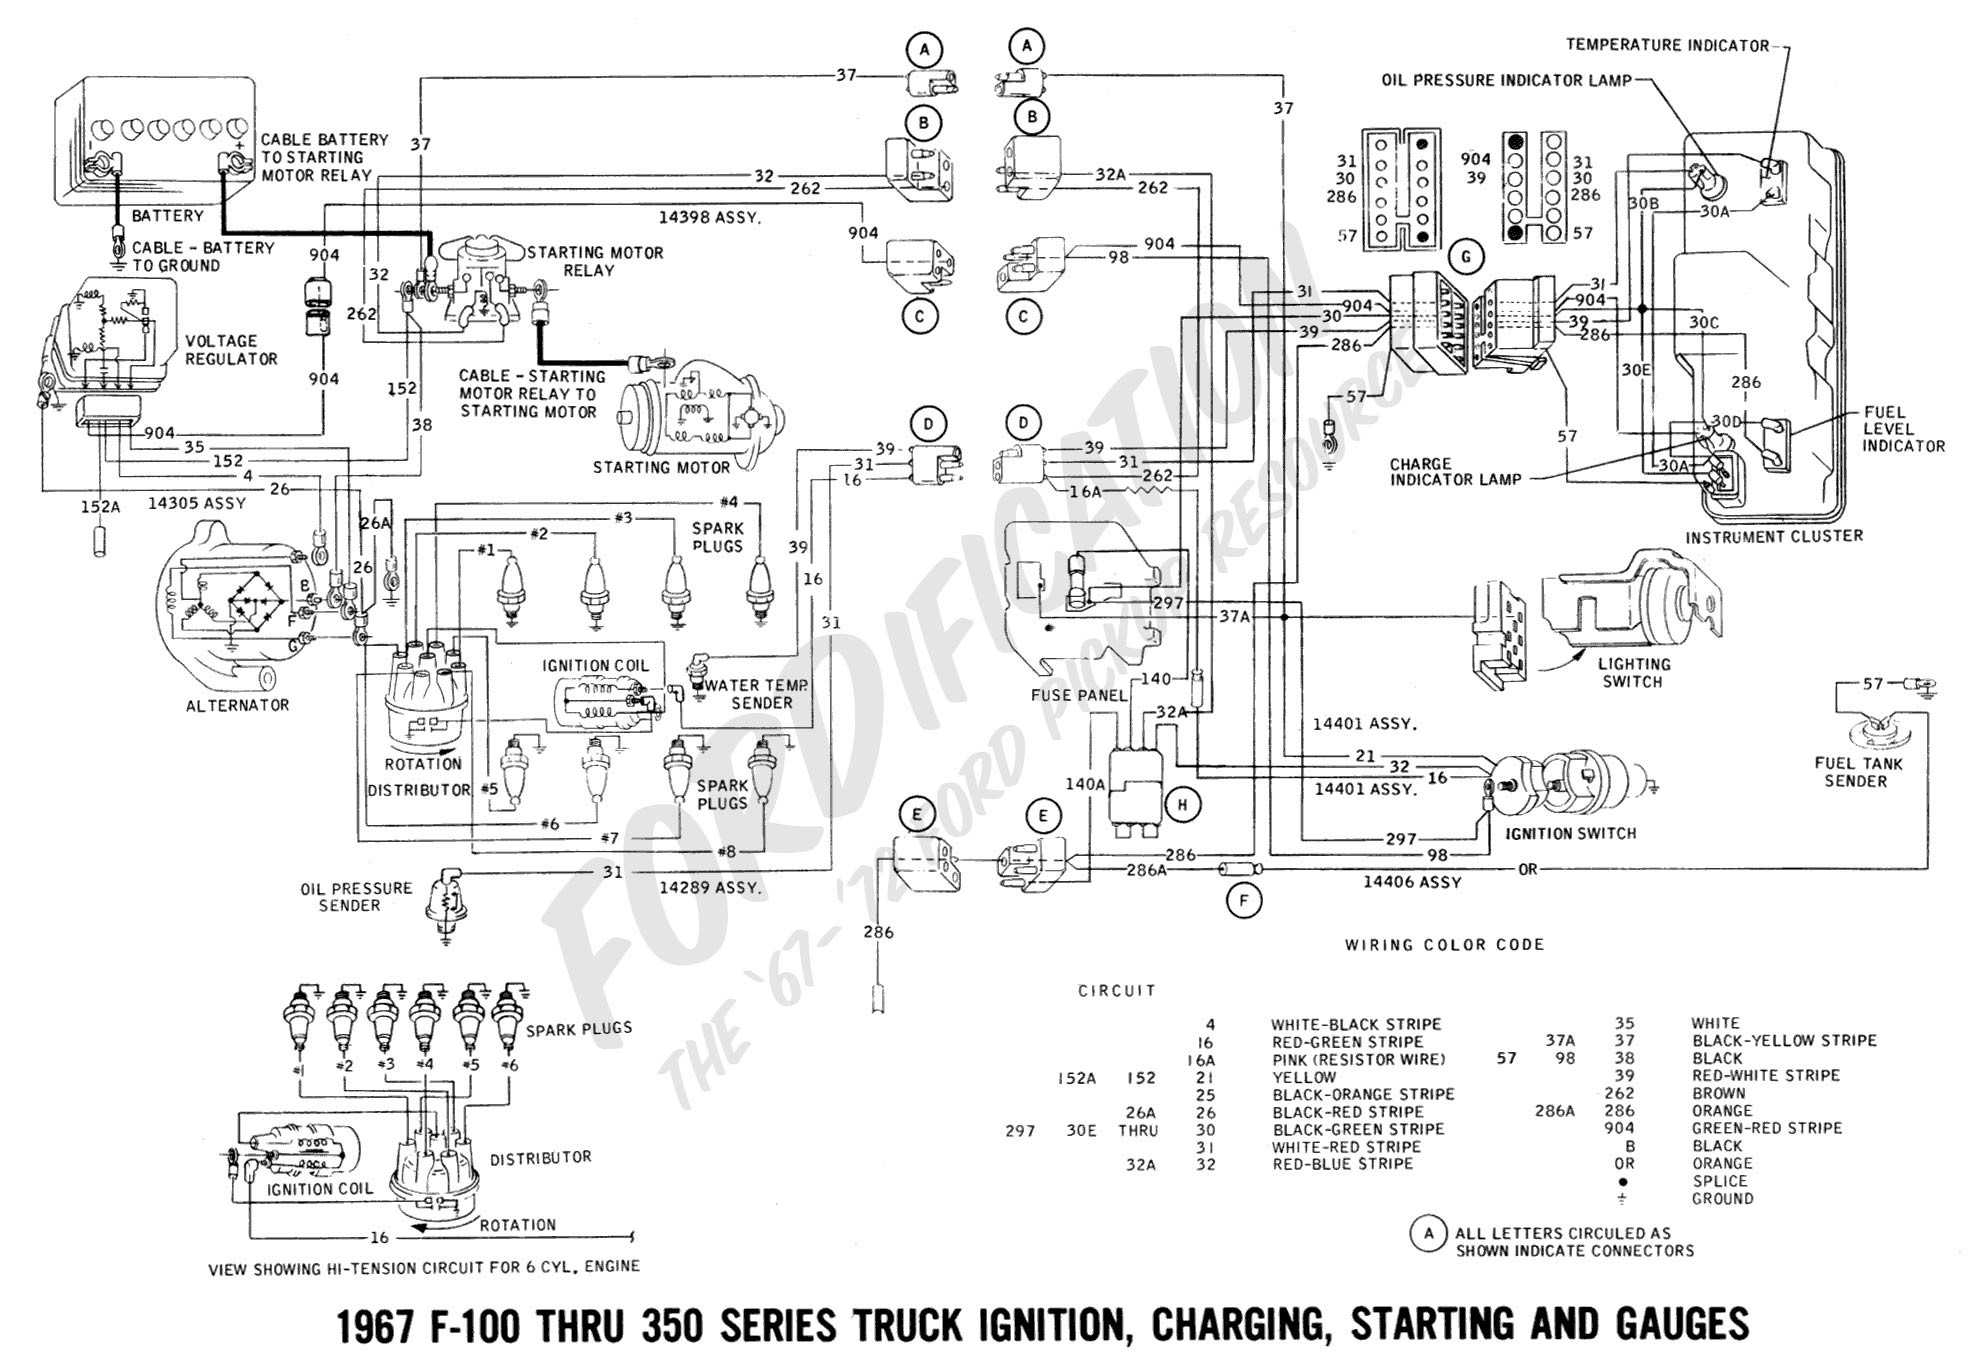 1968 Mustang Engine Wiring Diagram Well ford F 350 Wiring Diagram 1968 ford Mustang Fuse Box Diagram Of 1968 Mustang Engine Wiring Diagram